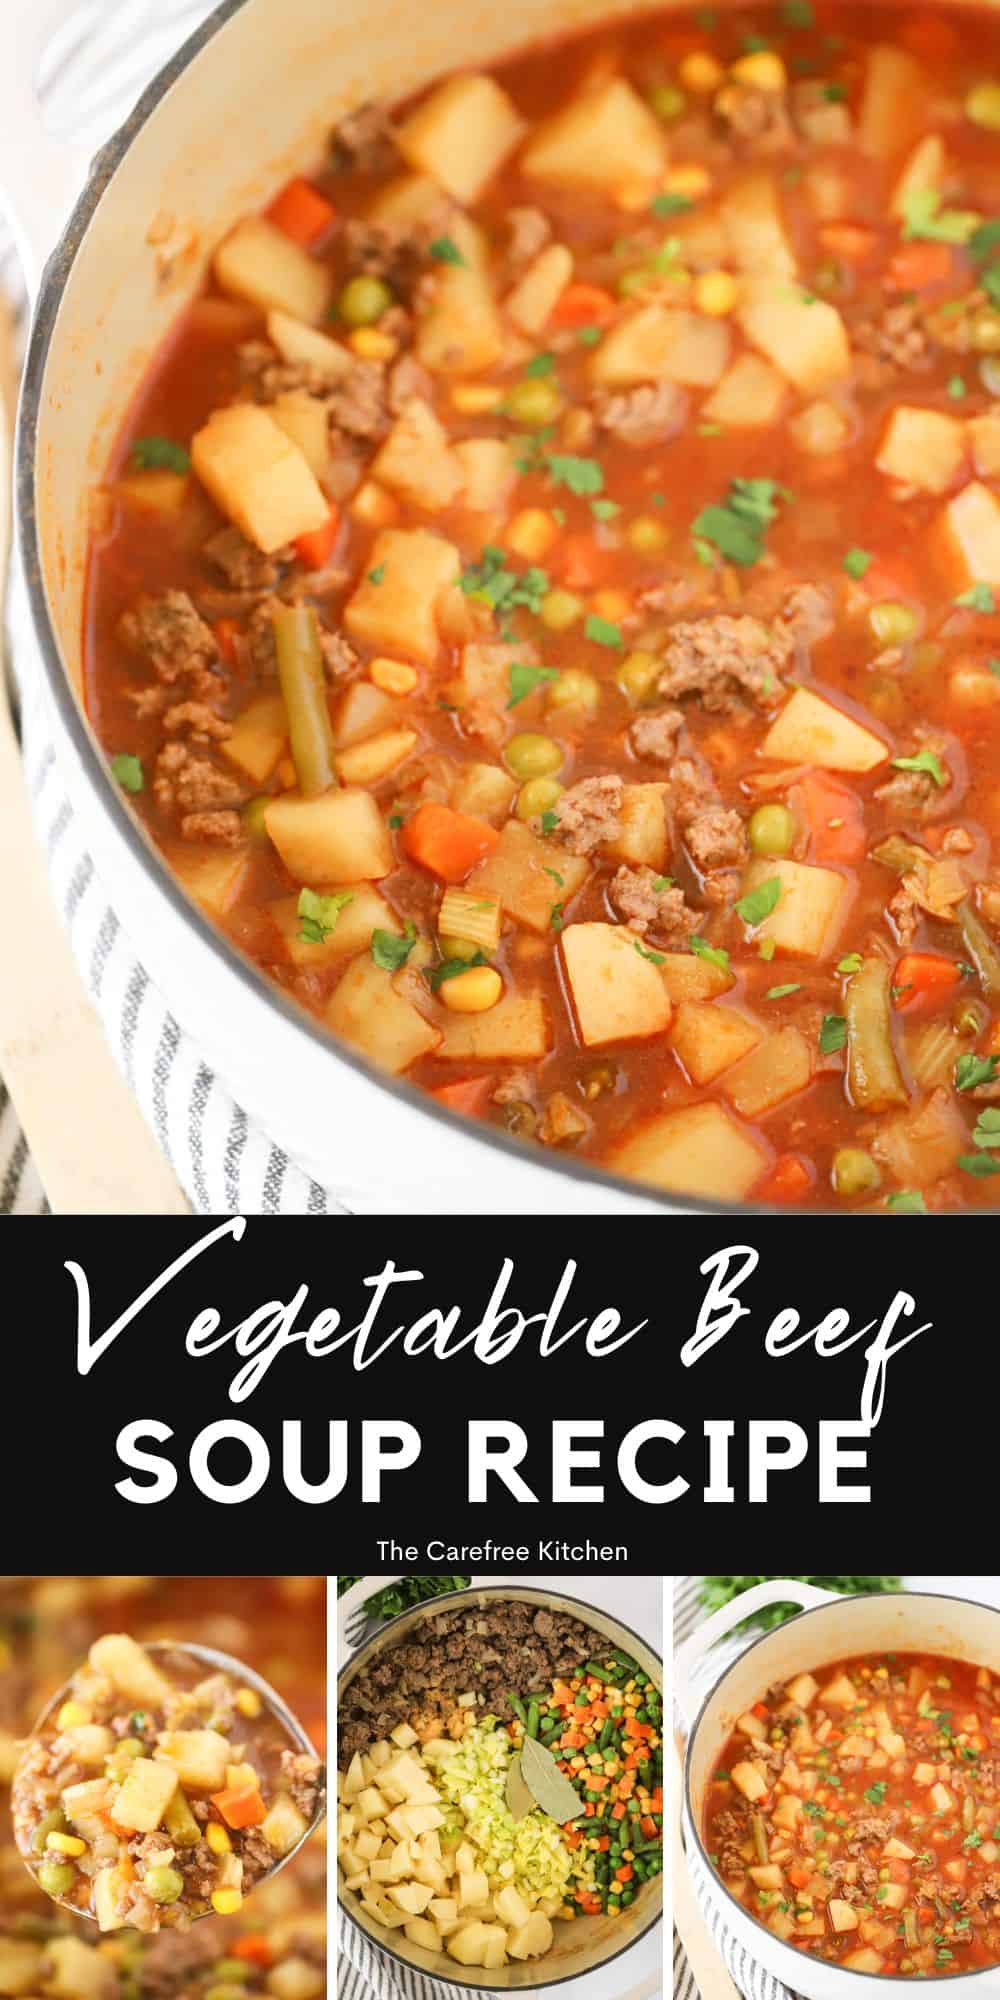 Vegetable Beef Soup - The Carefree Kitchen